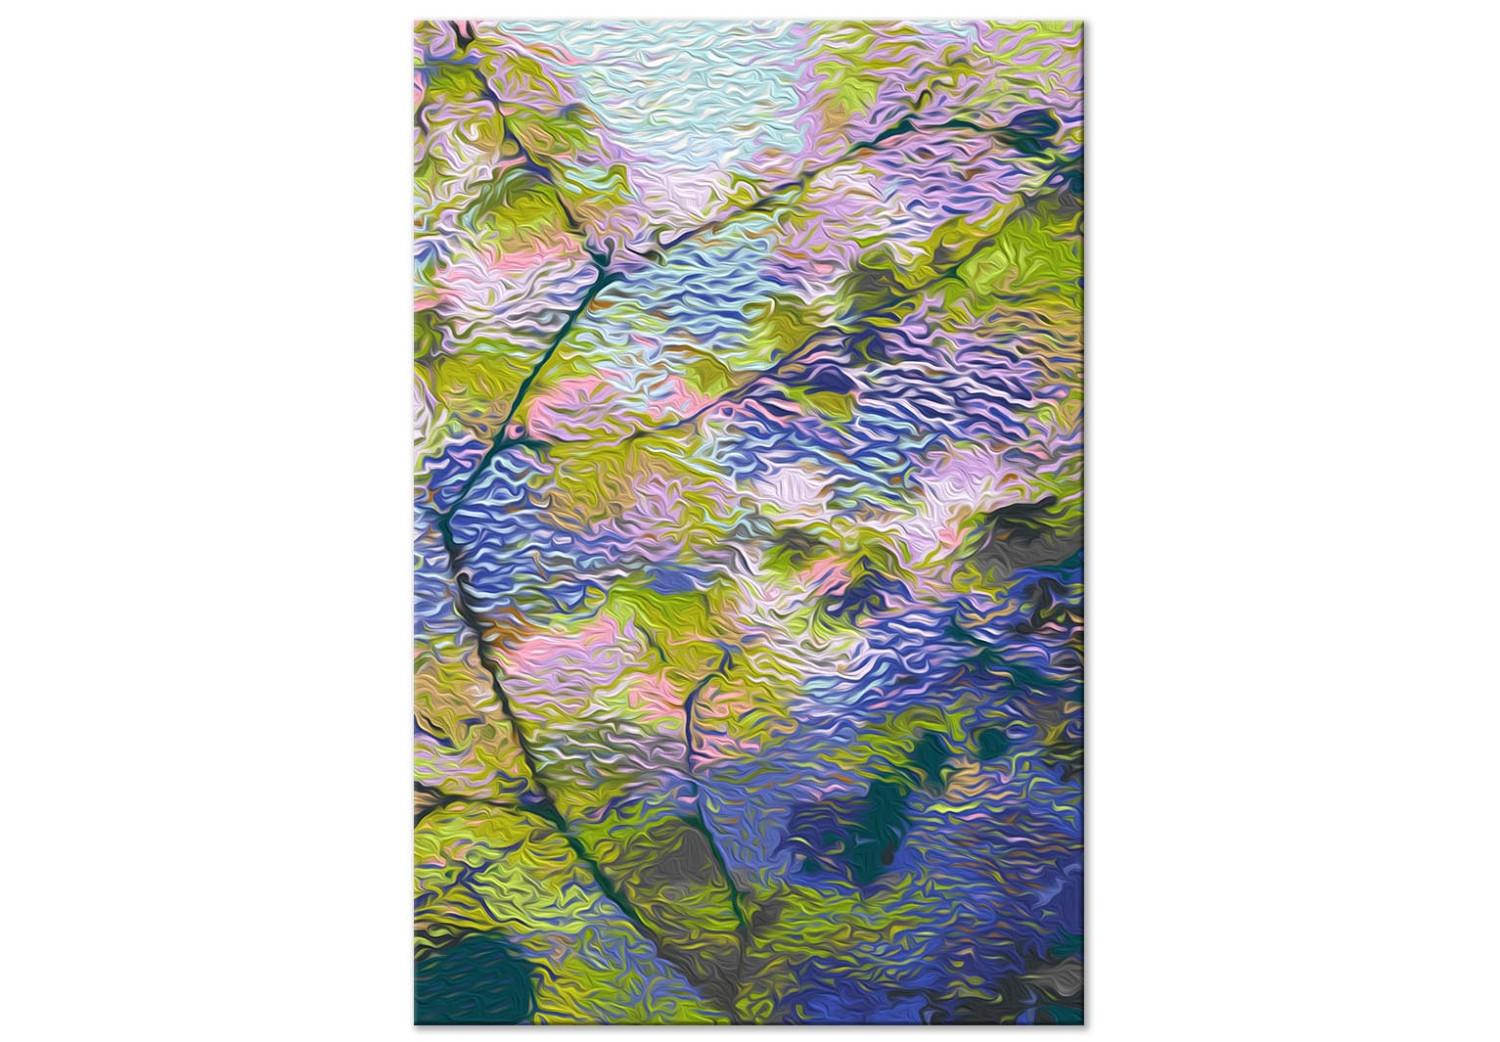  Dibujo para pintar con números View From the Window - Twigs With Small Green, Purple and Pink Leaves